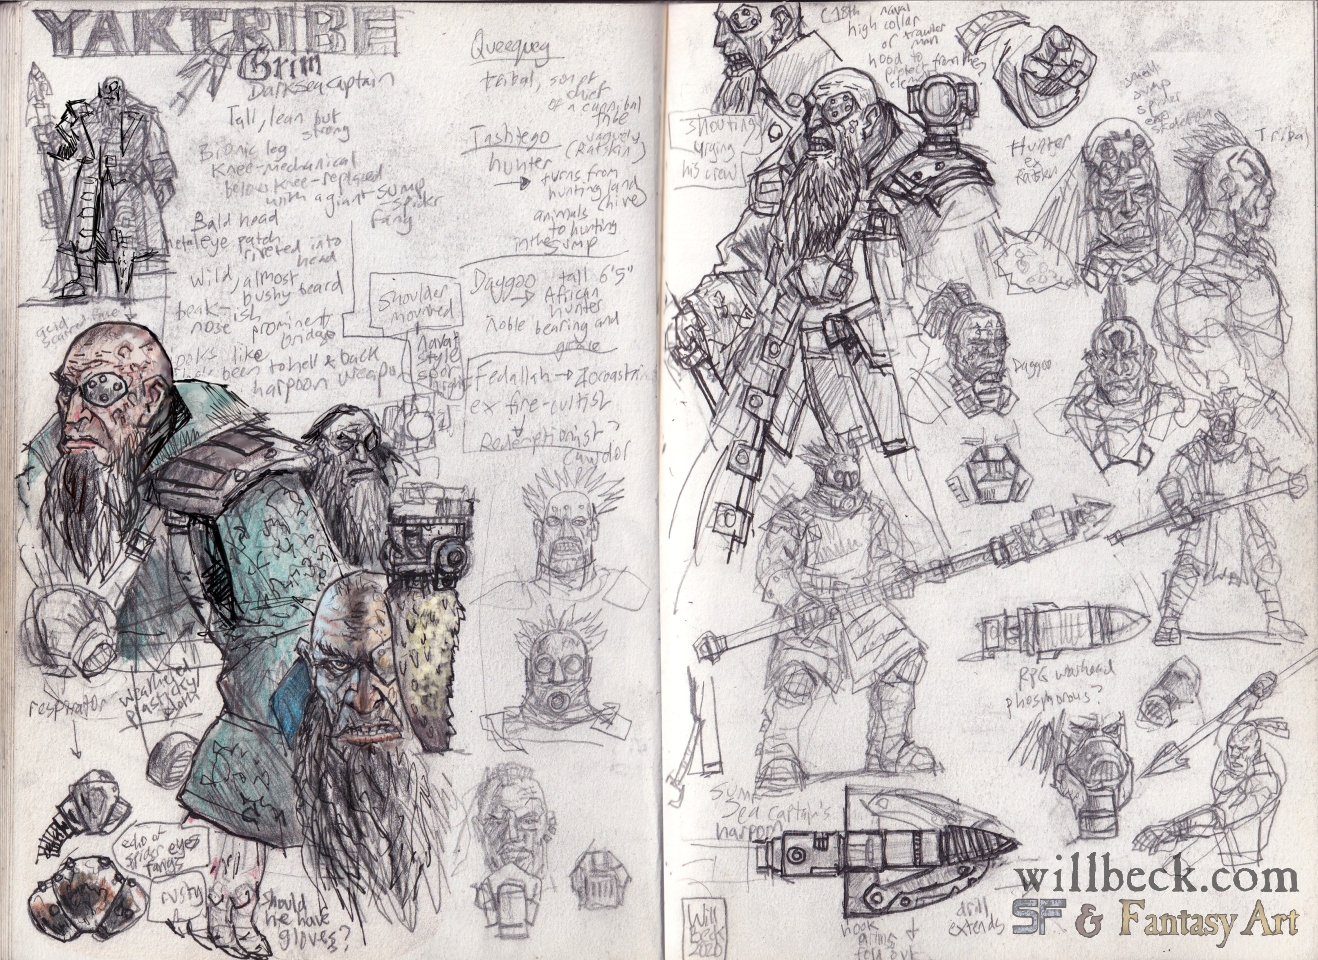 sketchbook pages showing the development of the Sump Ship Captain and his crew